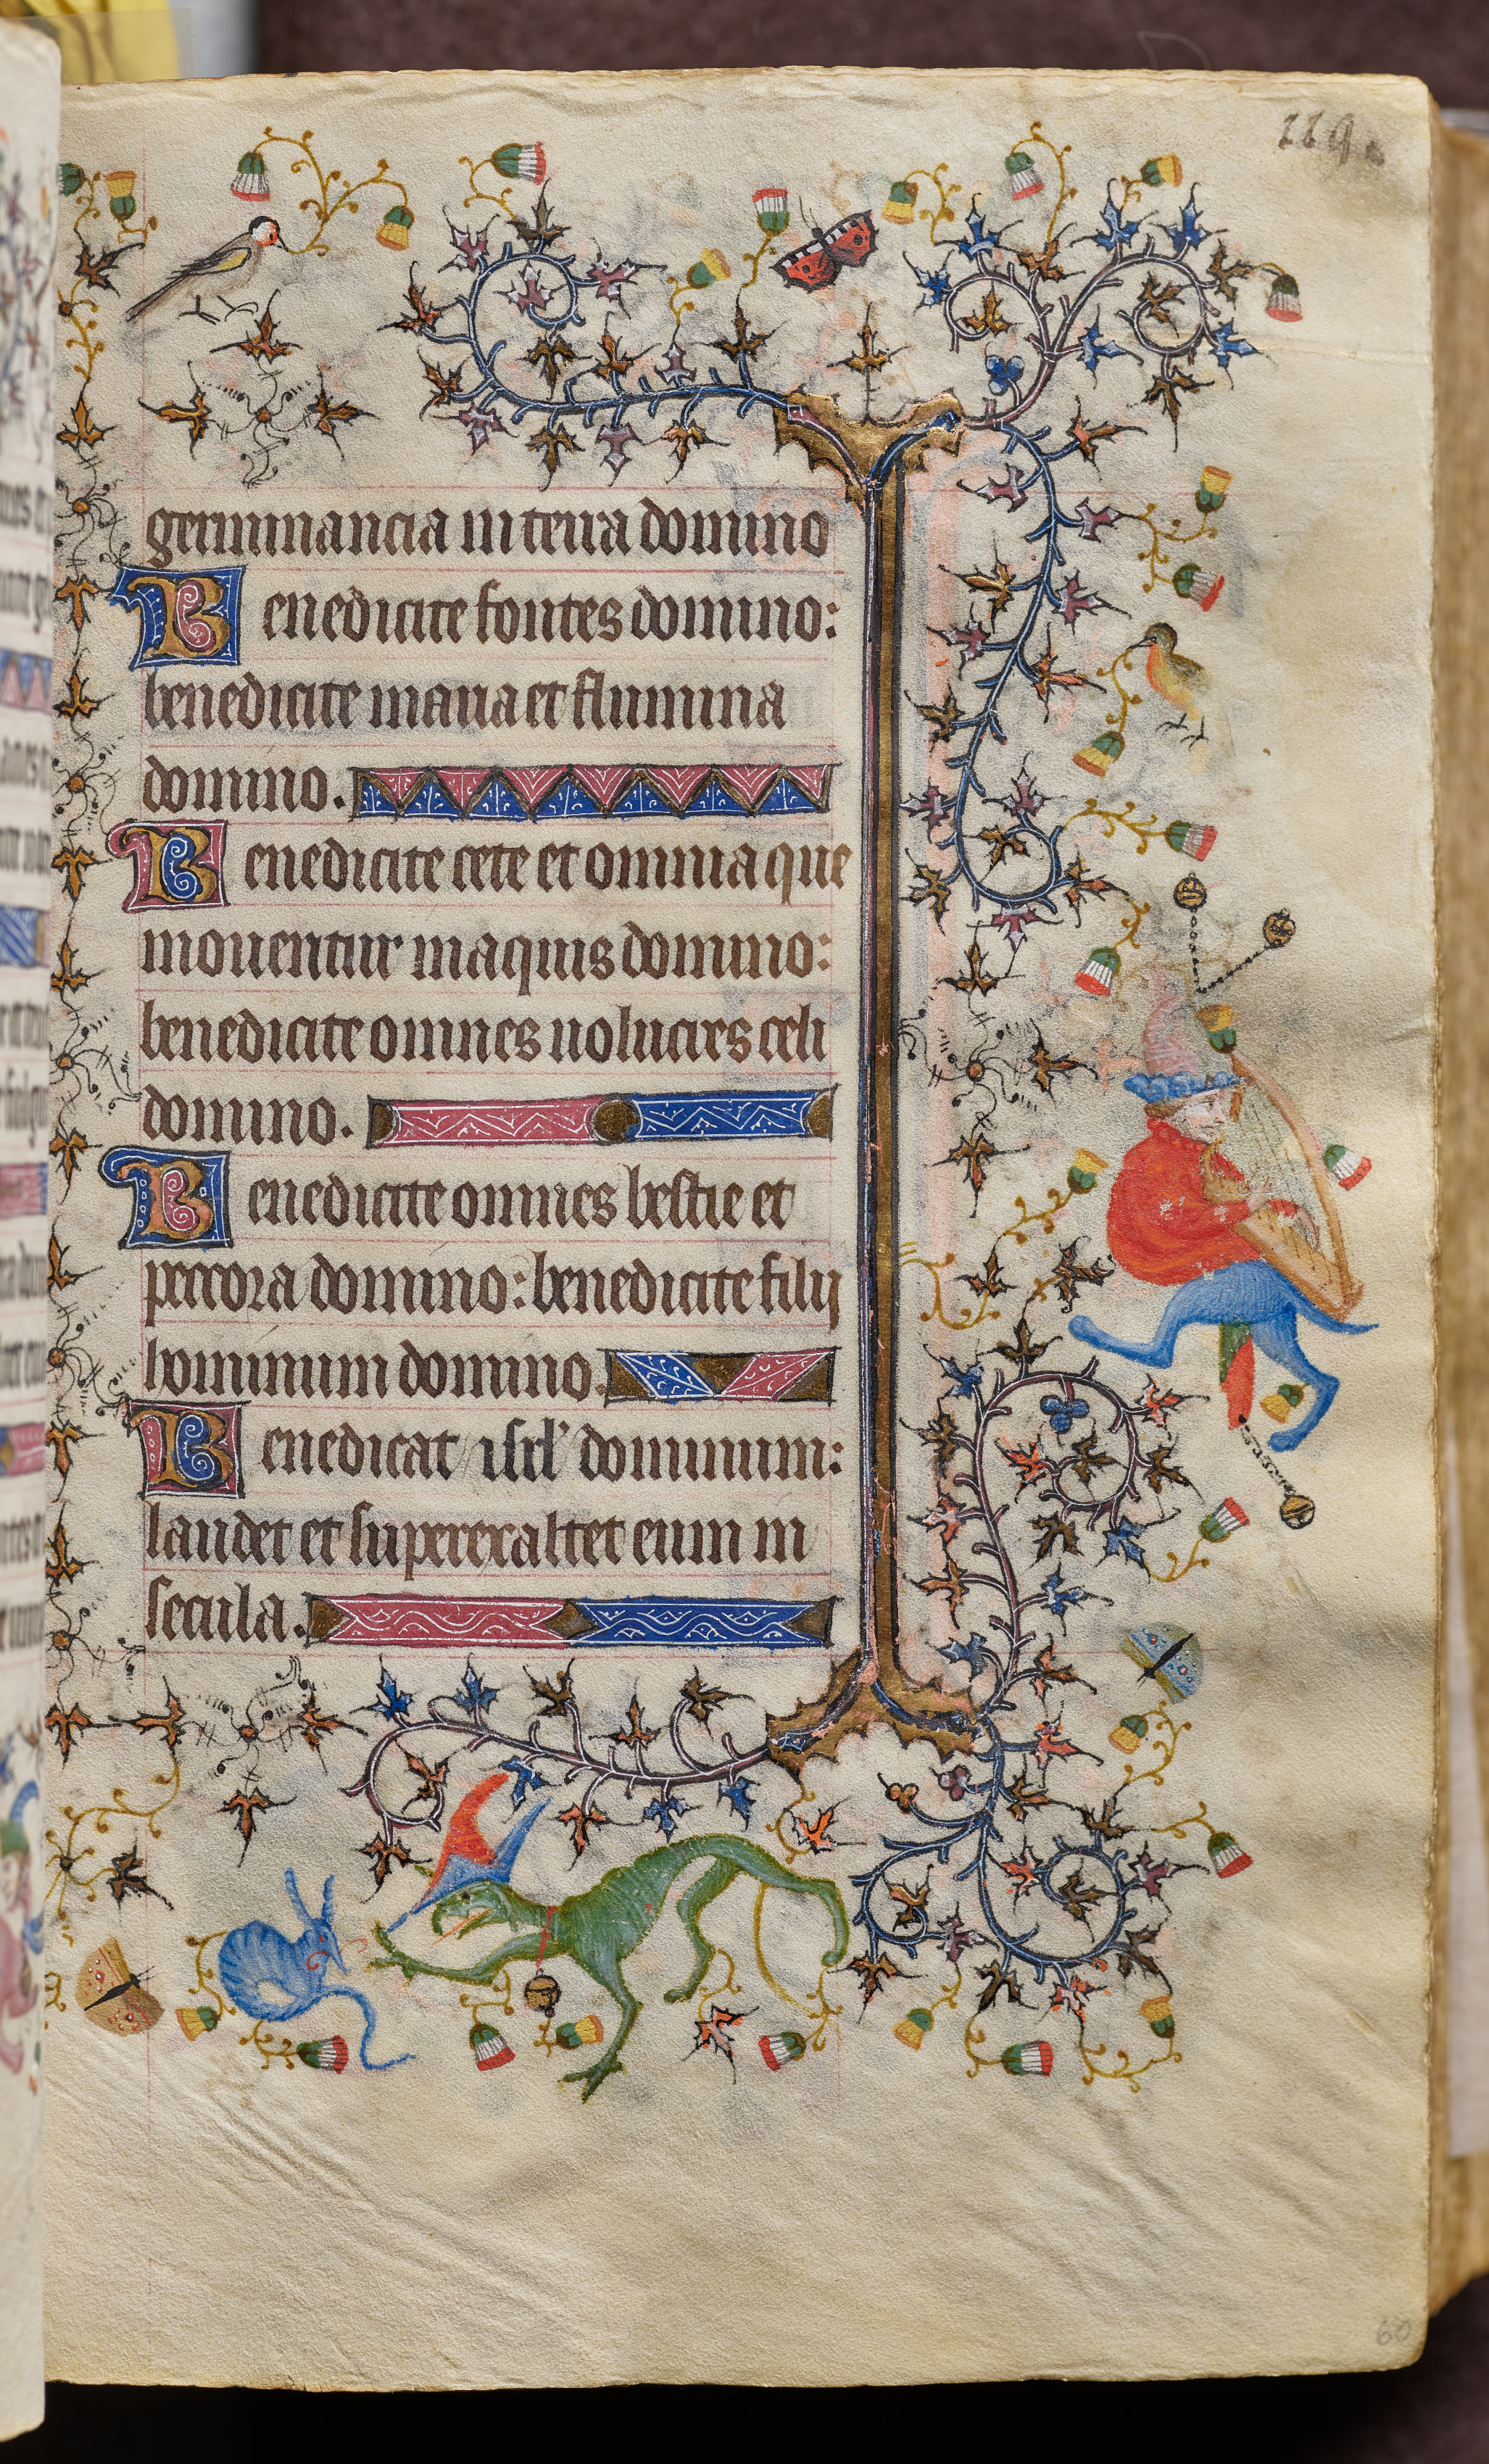 Hours of Charles the Noble, King of Navarre (1361-1425): fol. 60r, Text